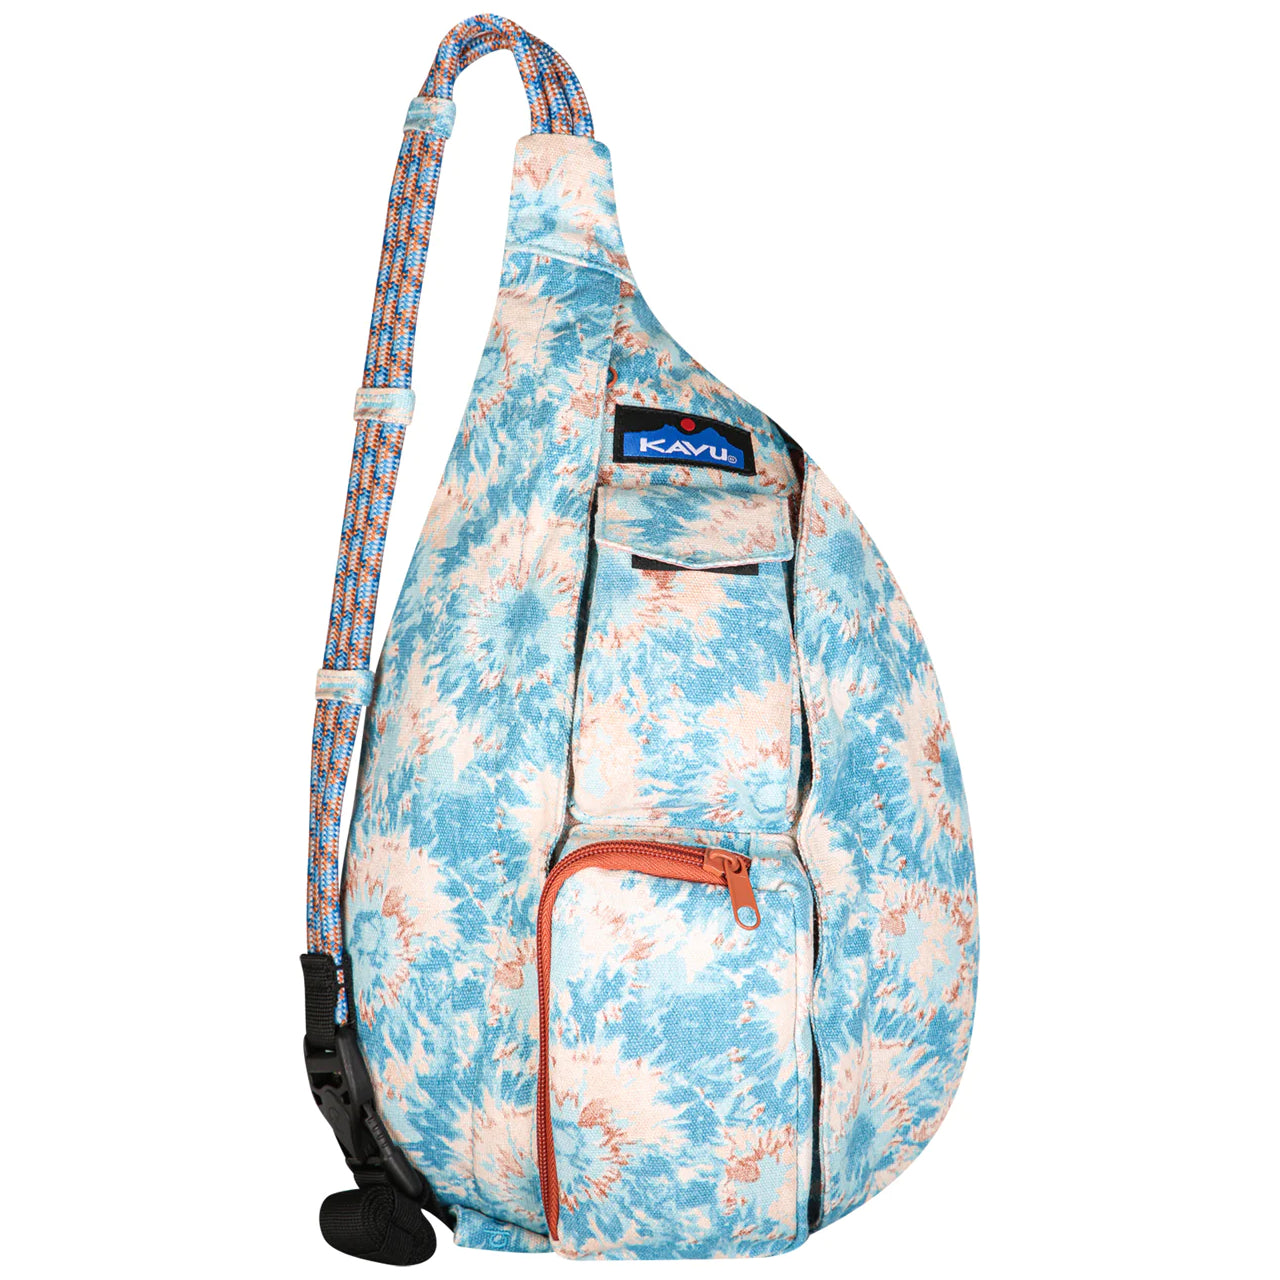 Kavu - Rope Sling - Carbon Tribal - Surf and Dirt